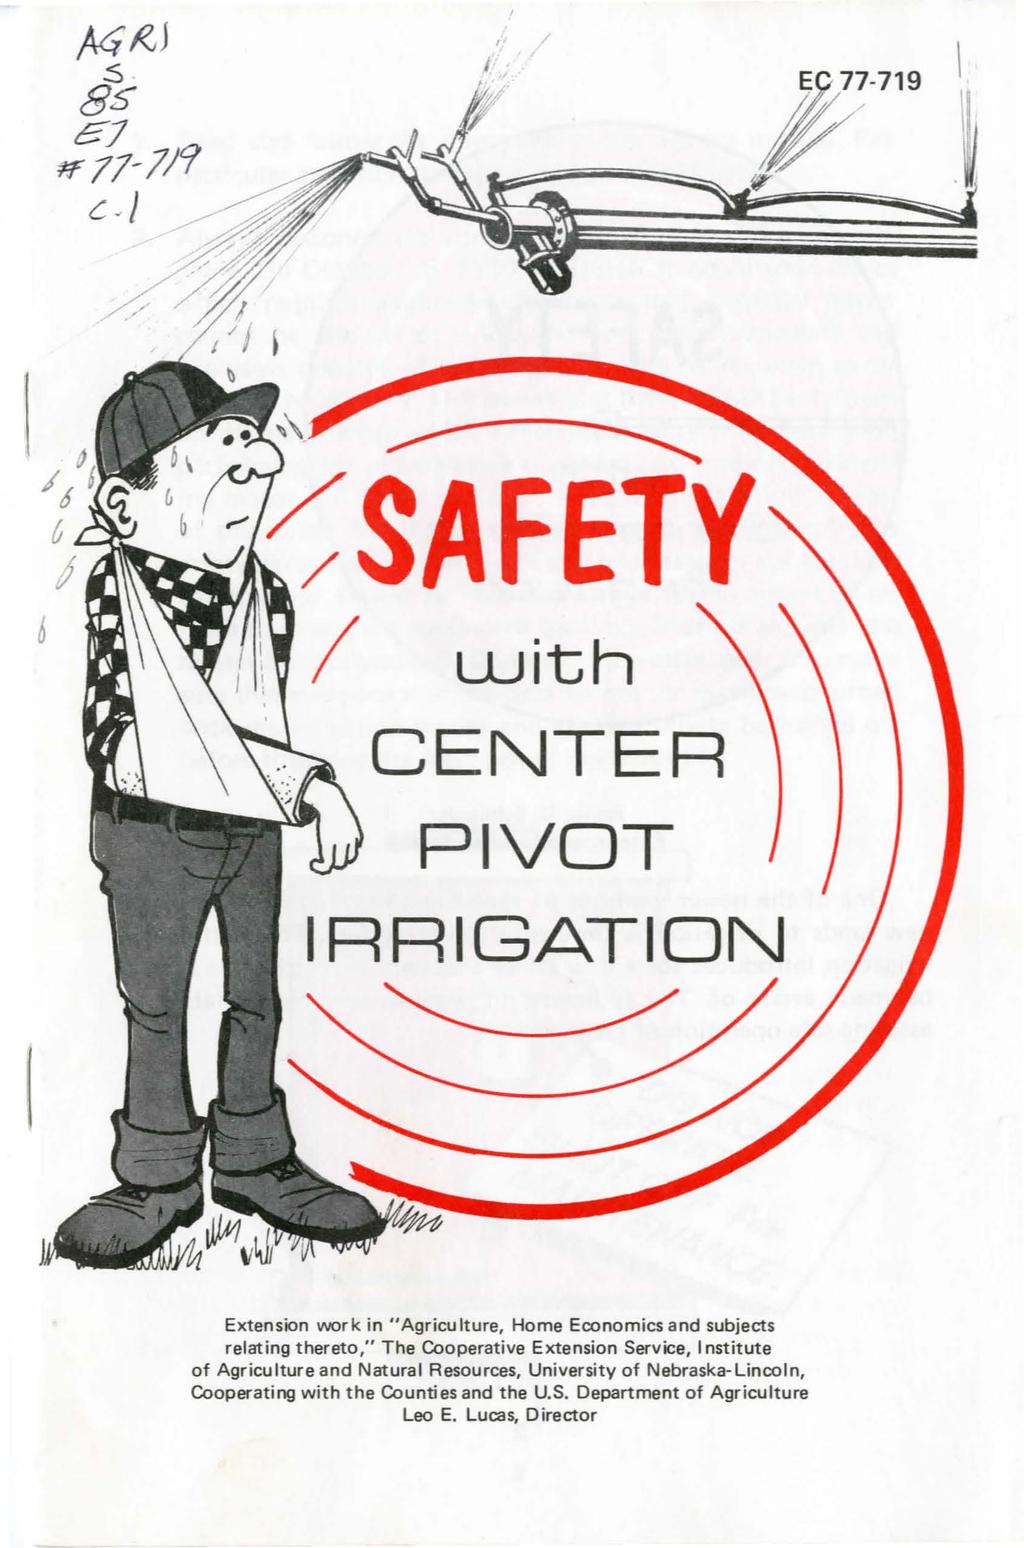 / 6 ~ SAFETY I LUith CENTER PIVOT Extension work in "Agriculture, Home Economics and subjects relating thereto," The Cooperative Extension Service, Institute